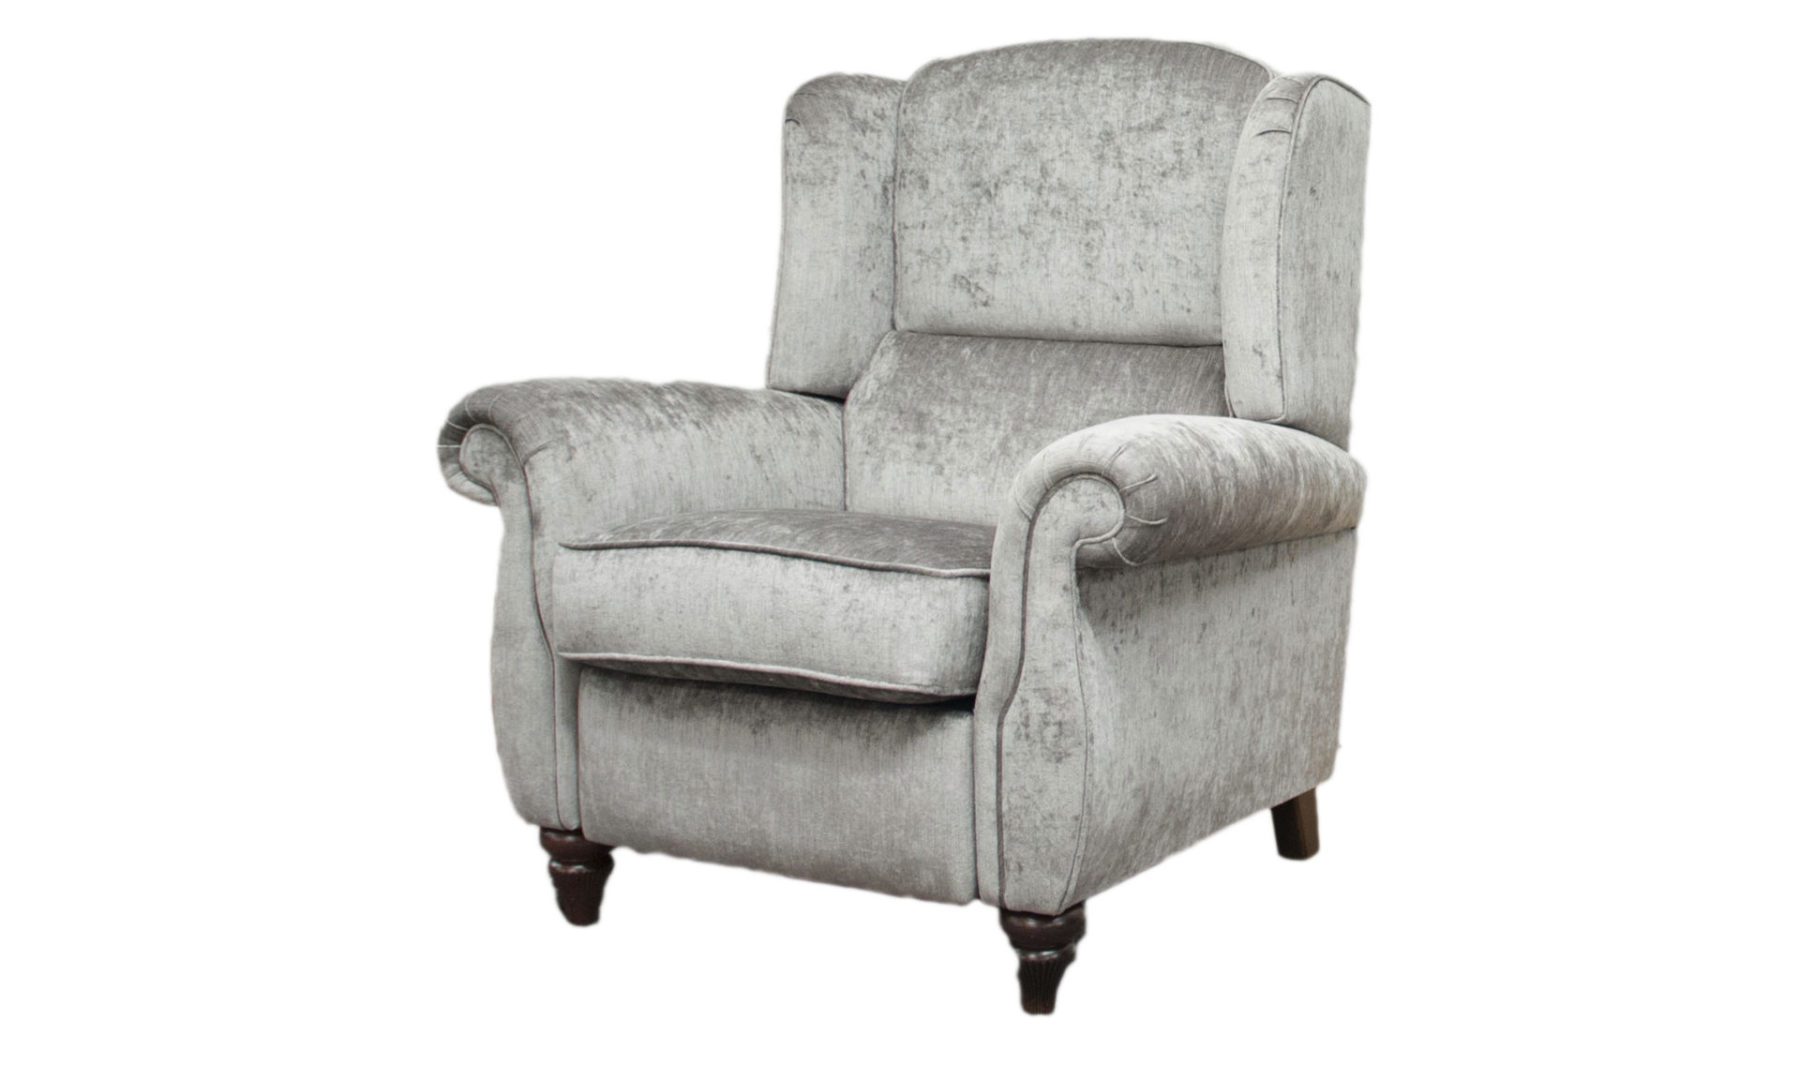 Greville Recliner in Edinburgh Truffle, Silver Collection Fabric 